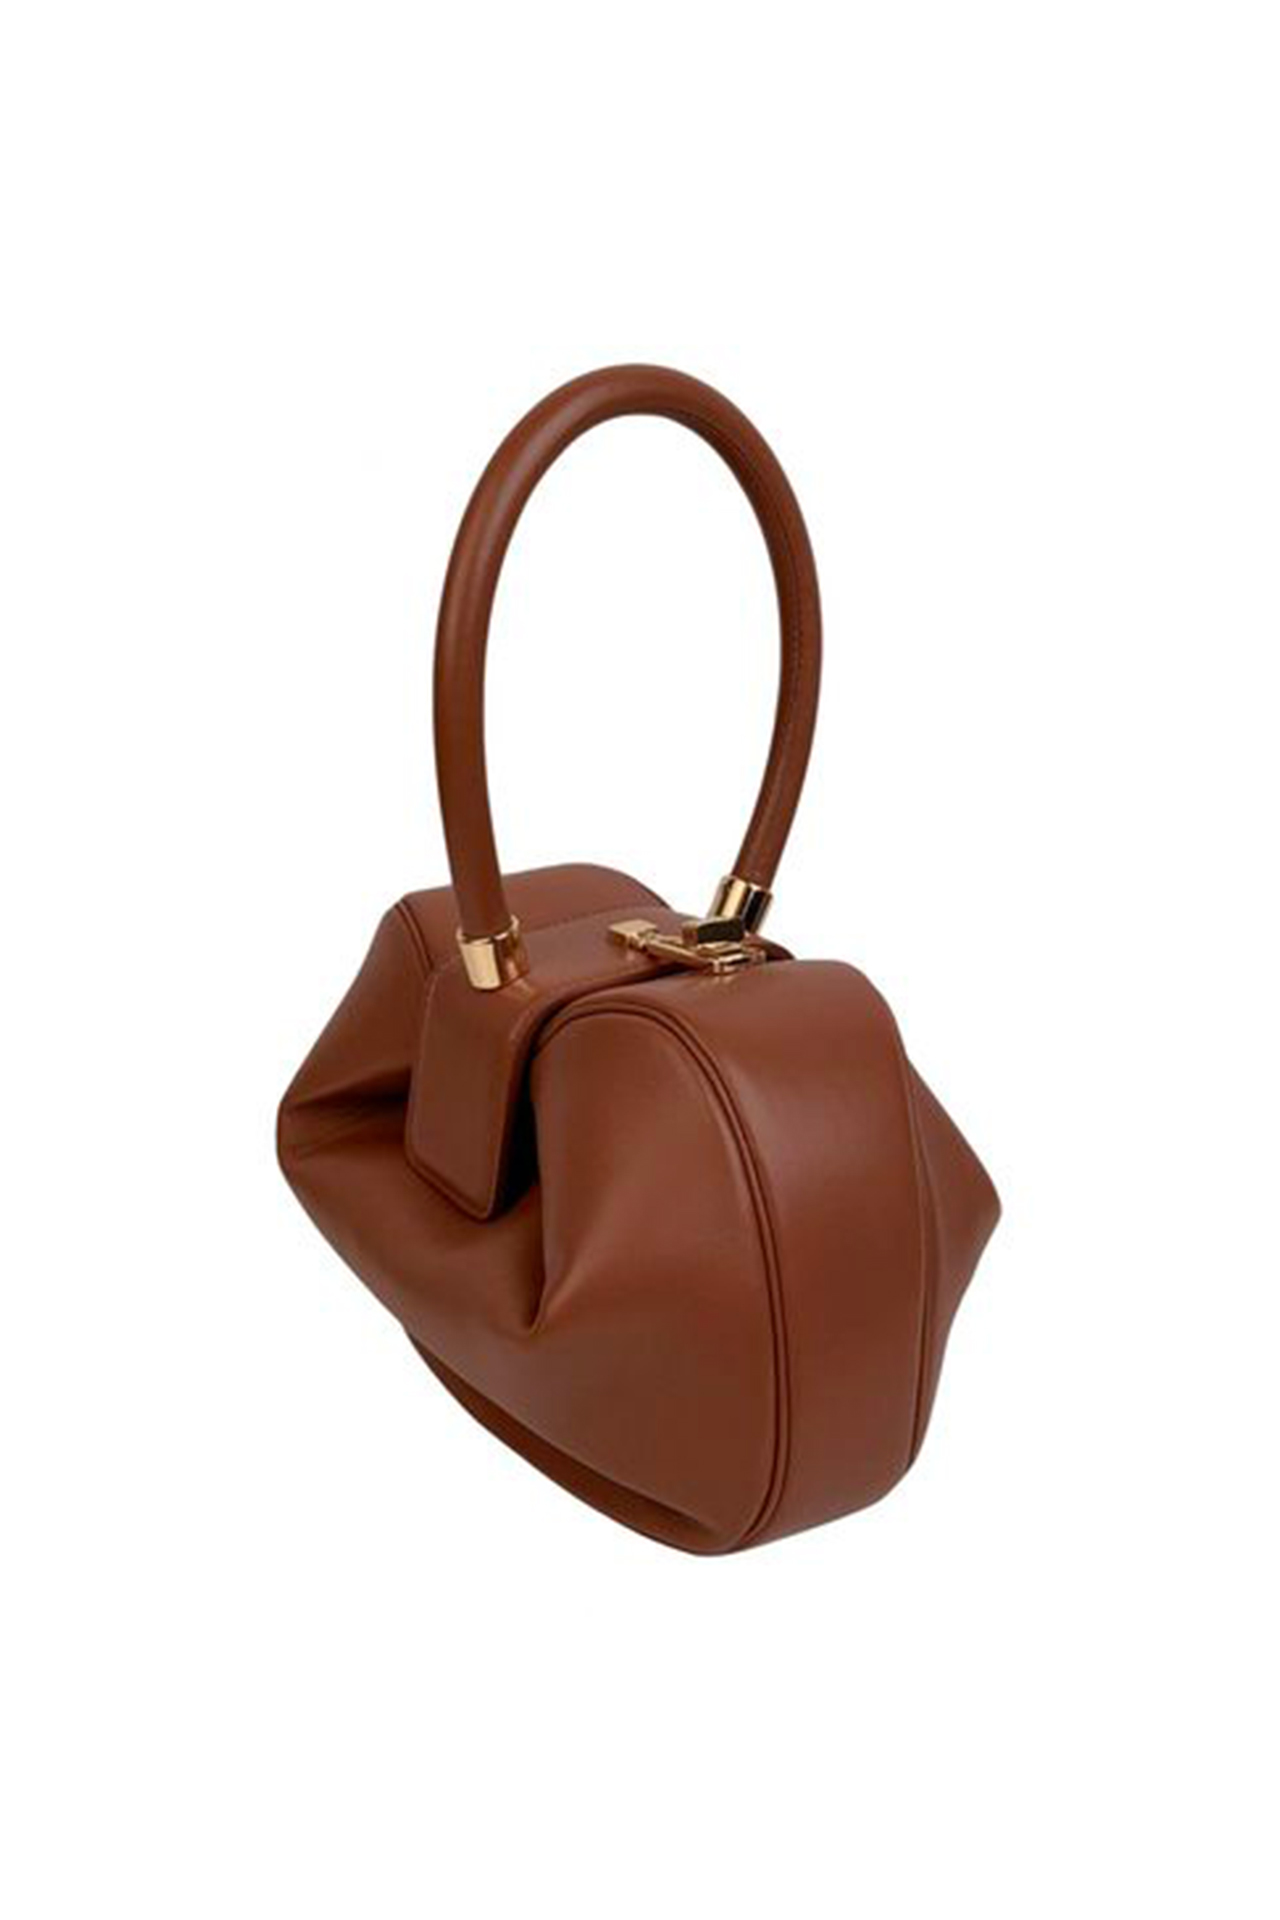 Top 5 Most Iconic Hermès Leathers, Pre-Loved Luxury Bag Reseller